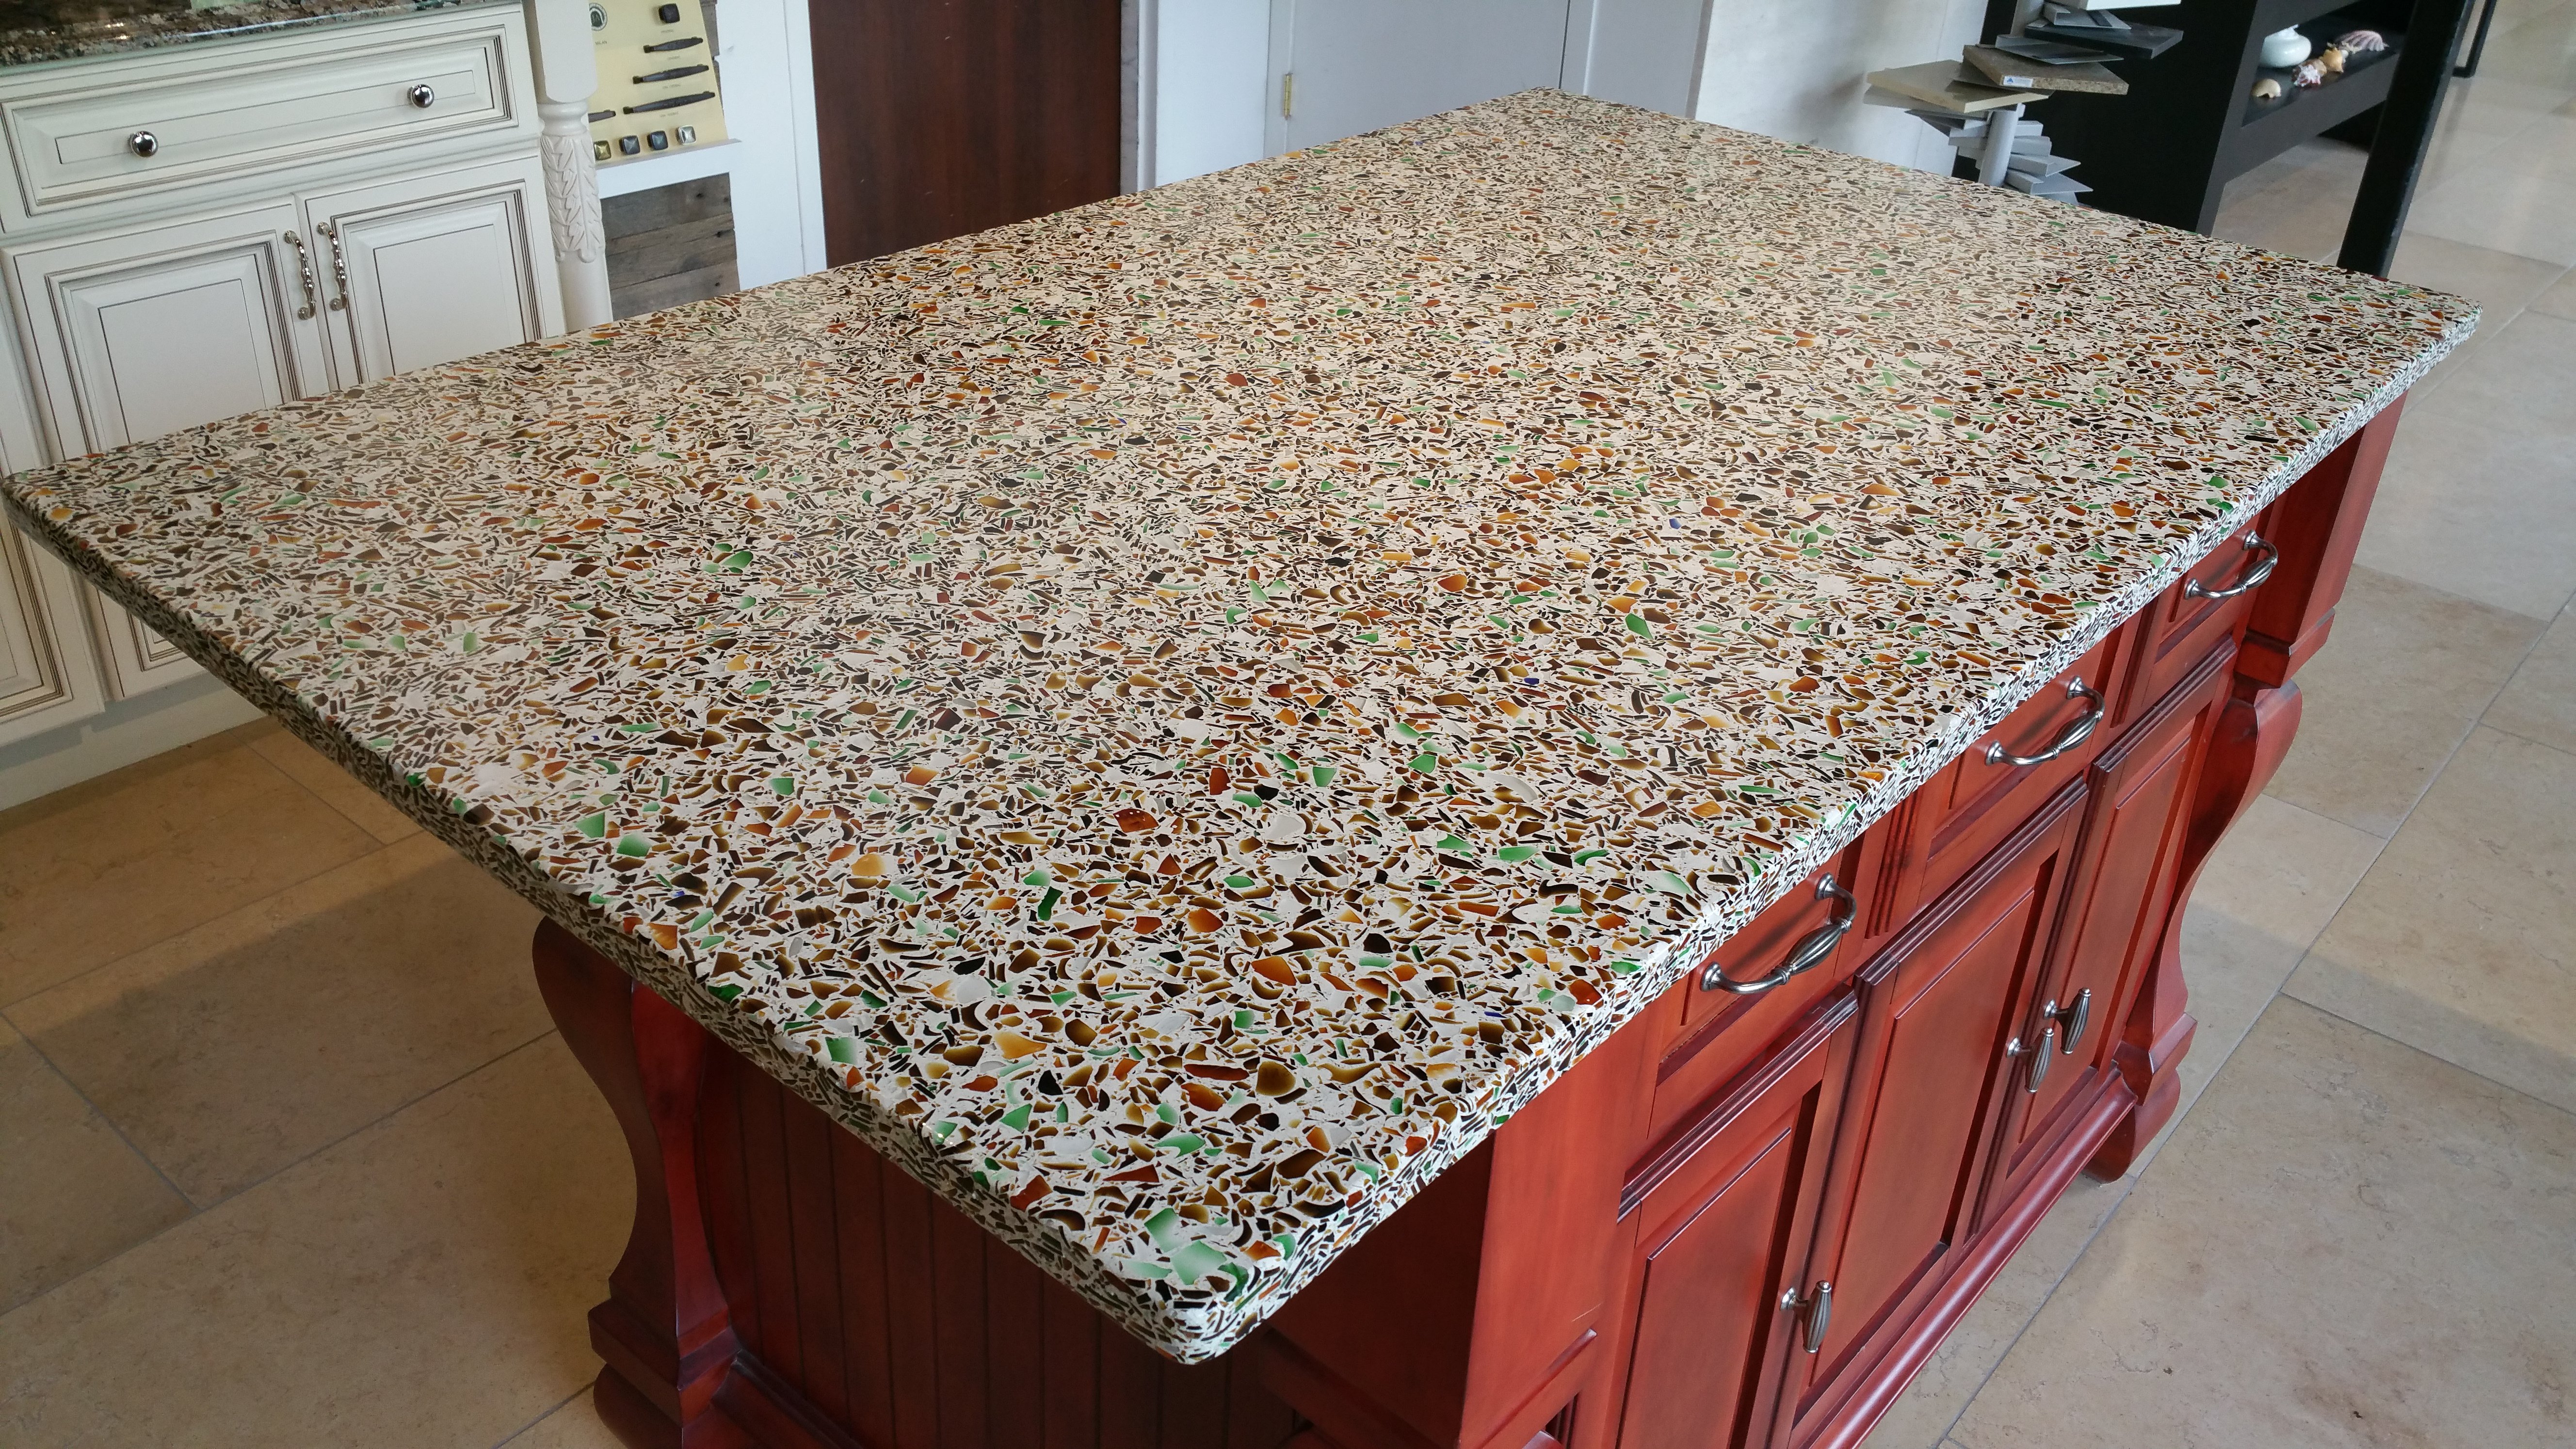 Recycled Glass Countertops Styles, How To Install Recycled Glass Countertops